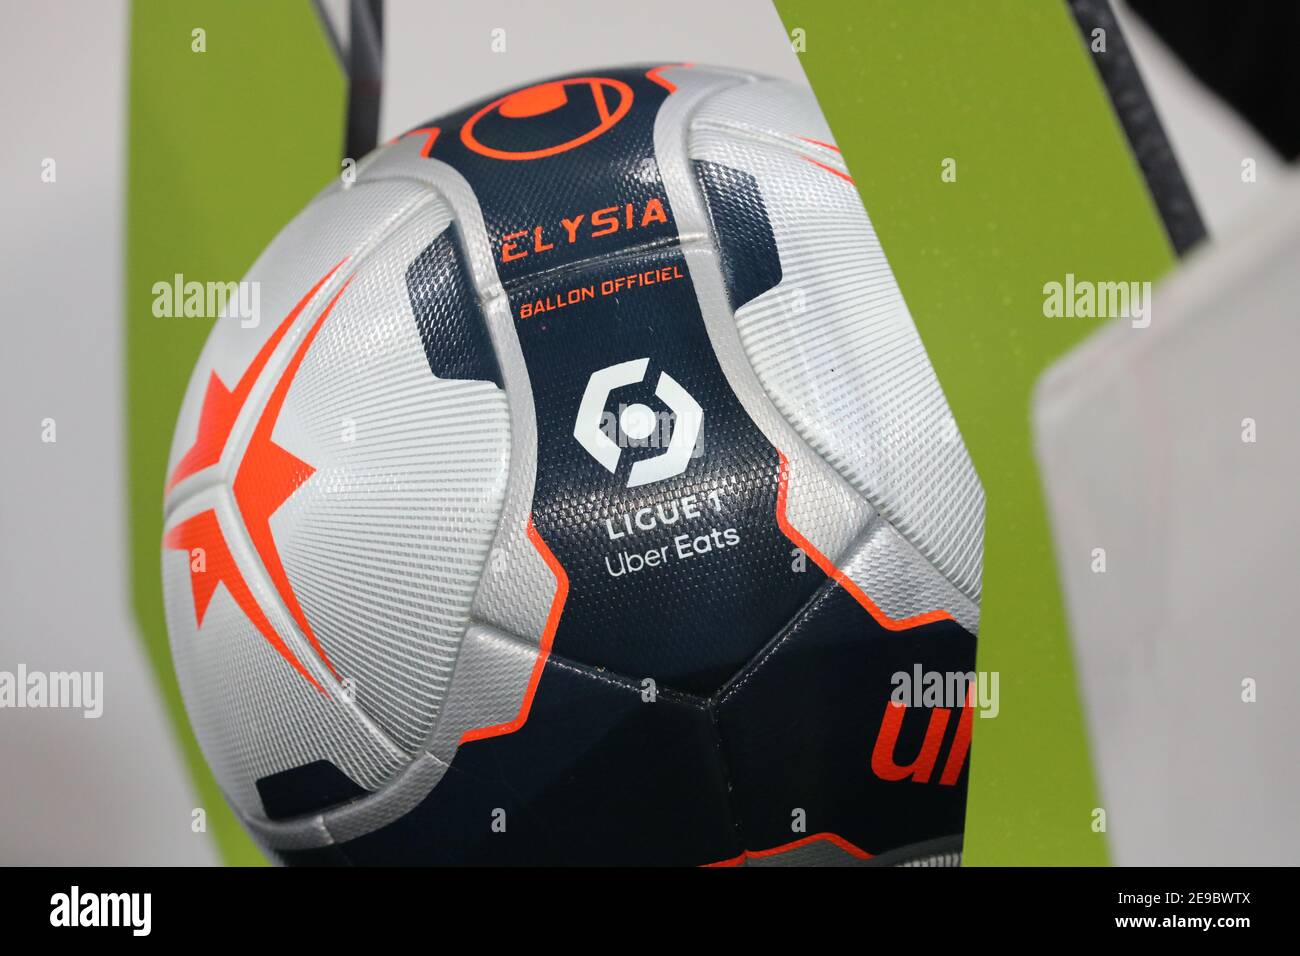 New Ballon Ligue 1 during the French championship Ligue 1 football match  between RC Lens and Olympique de Marseille on Februar / LM Stock Photo -  Alamy